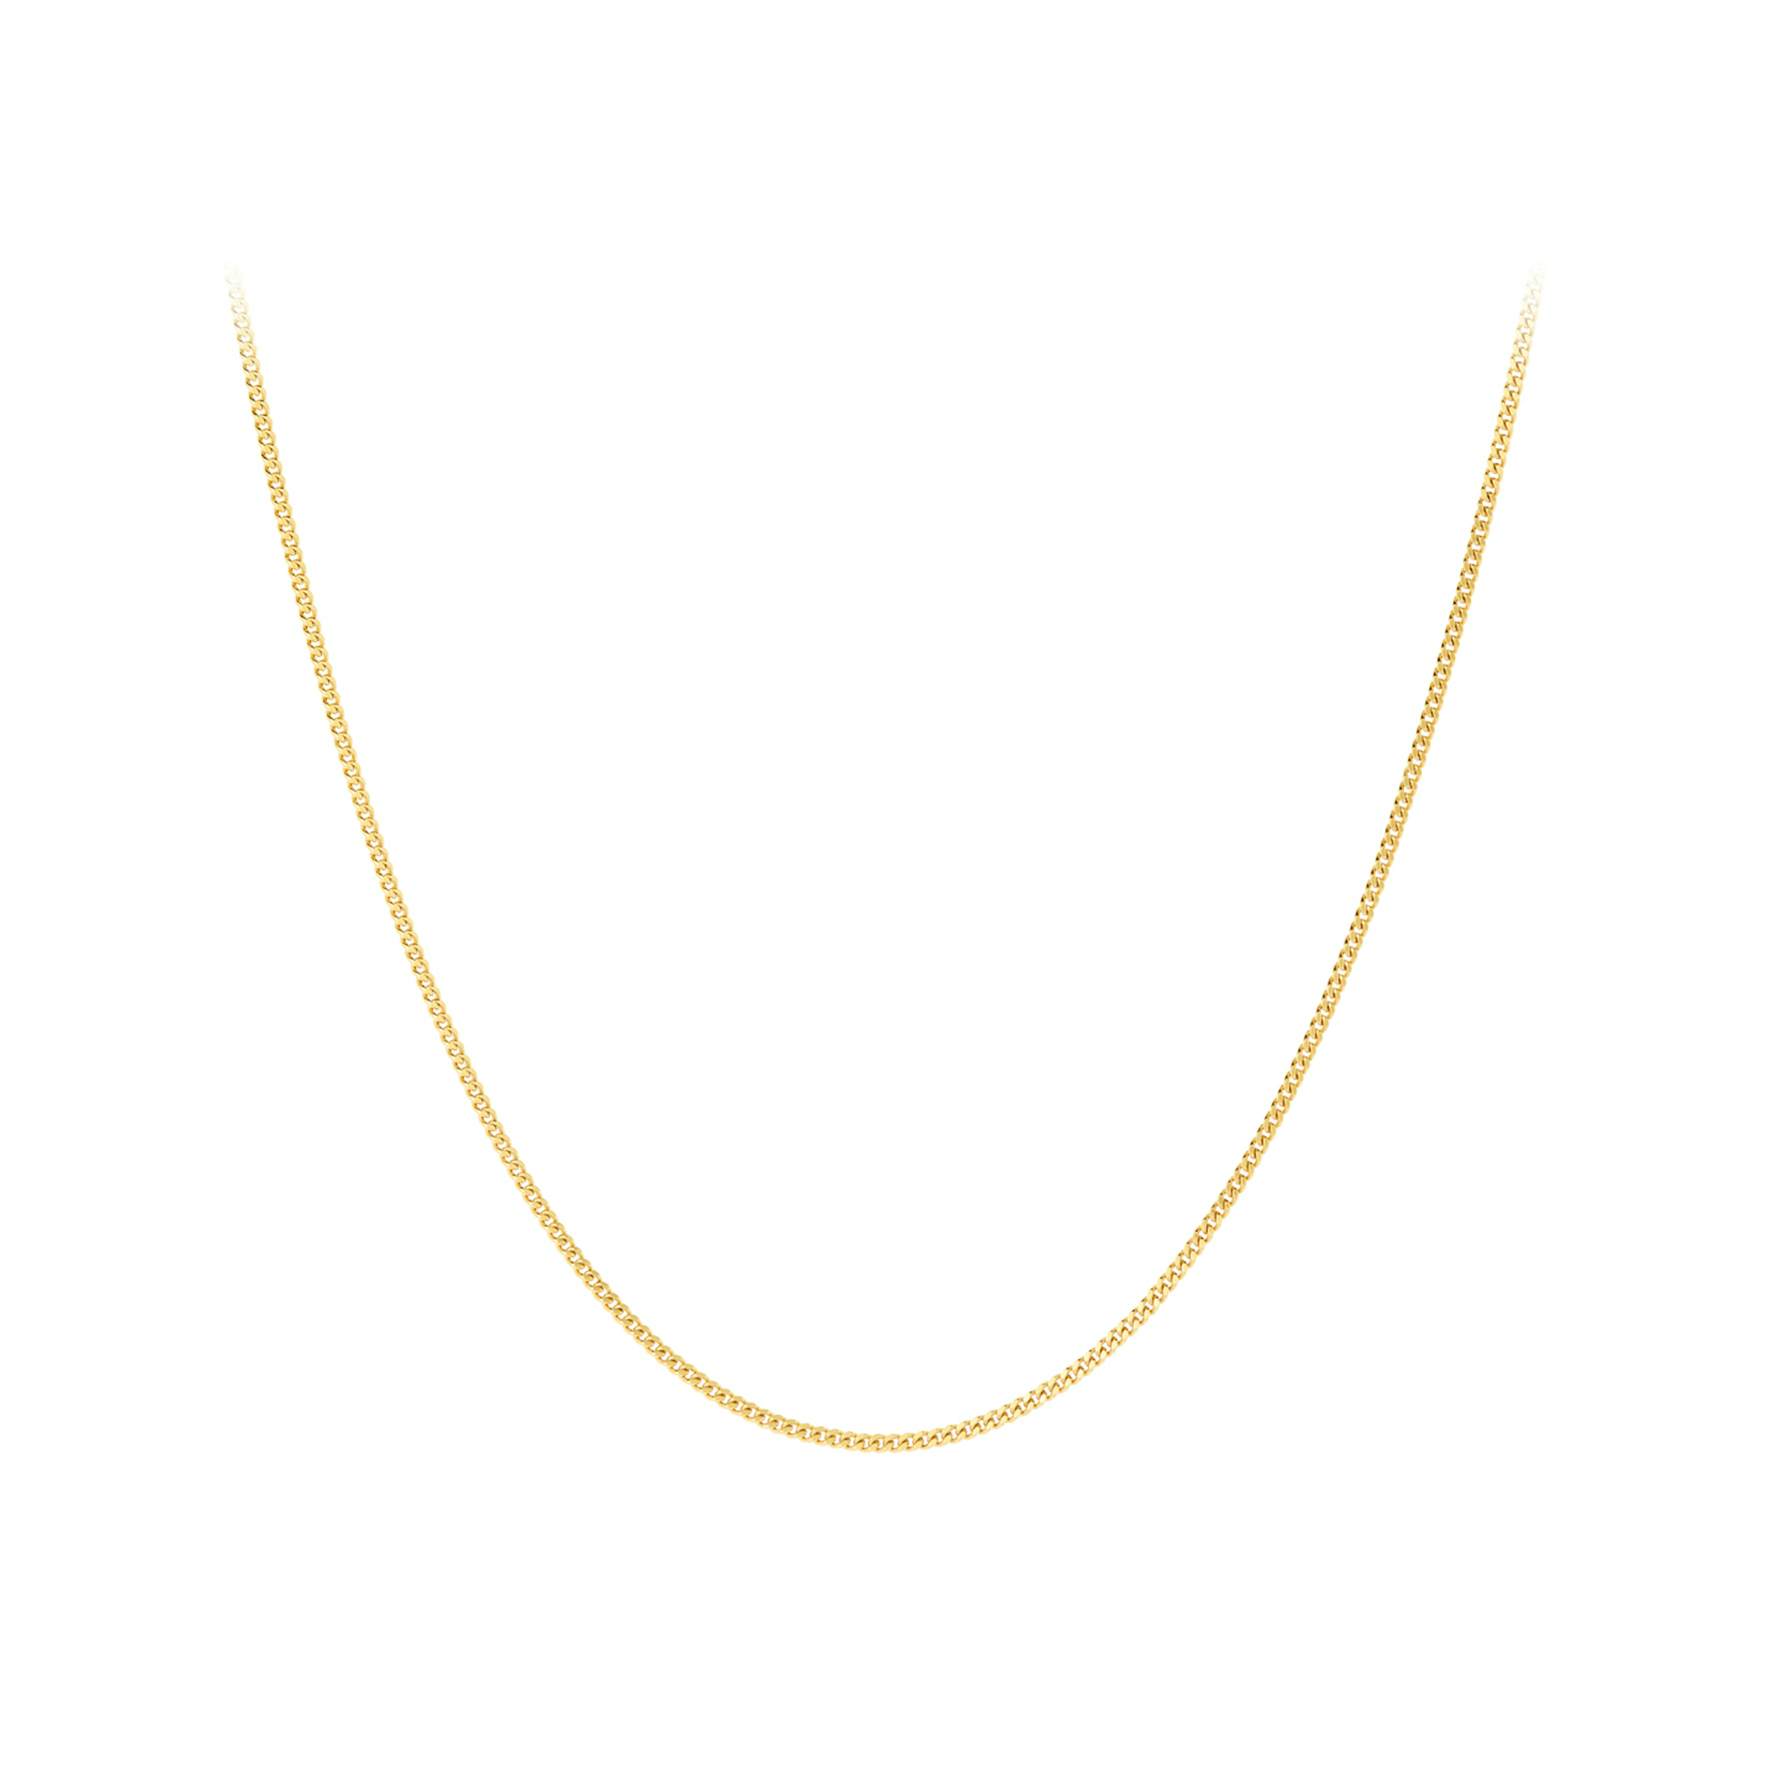 Ea Necklace from Pernille Corydon in Goldplated-Silver Sterling 925